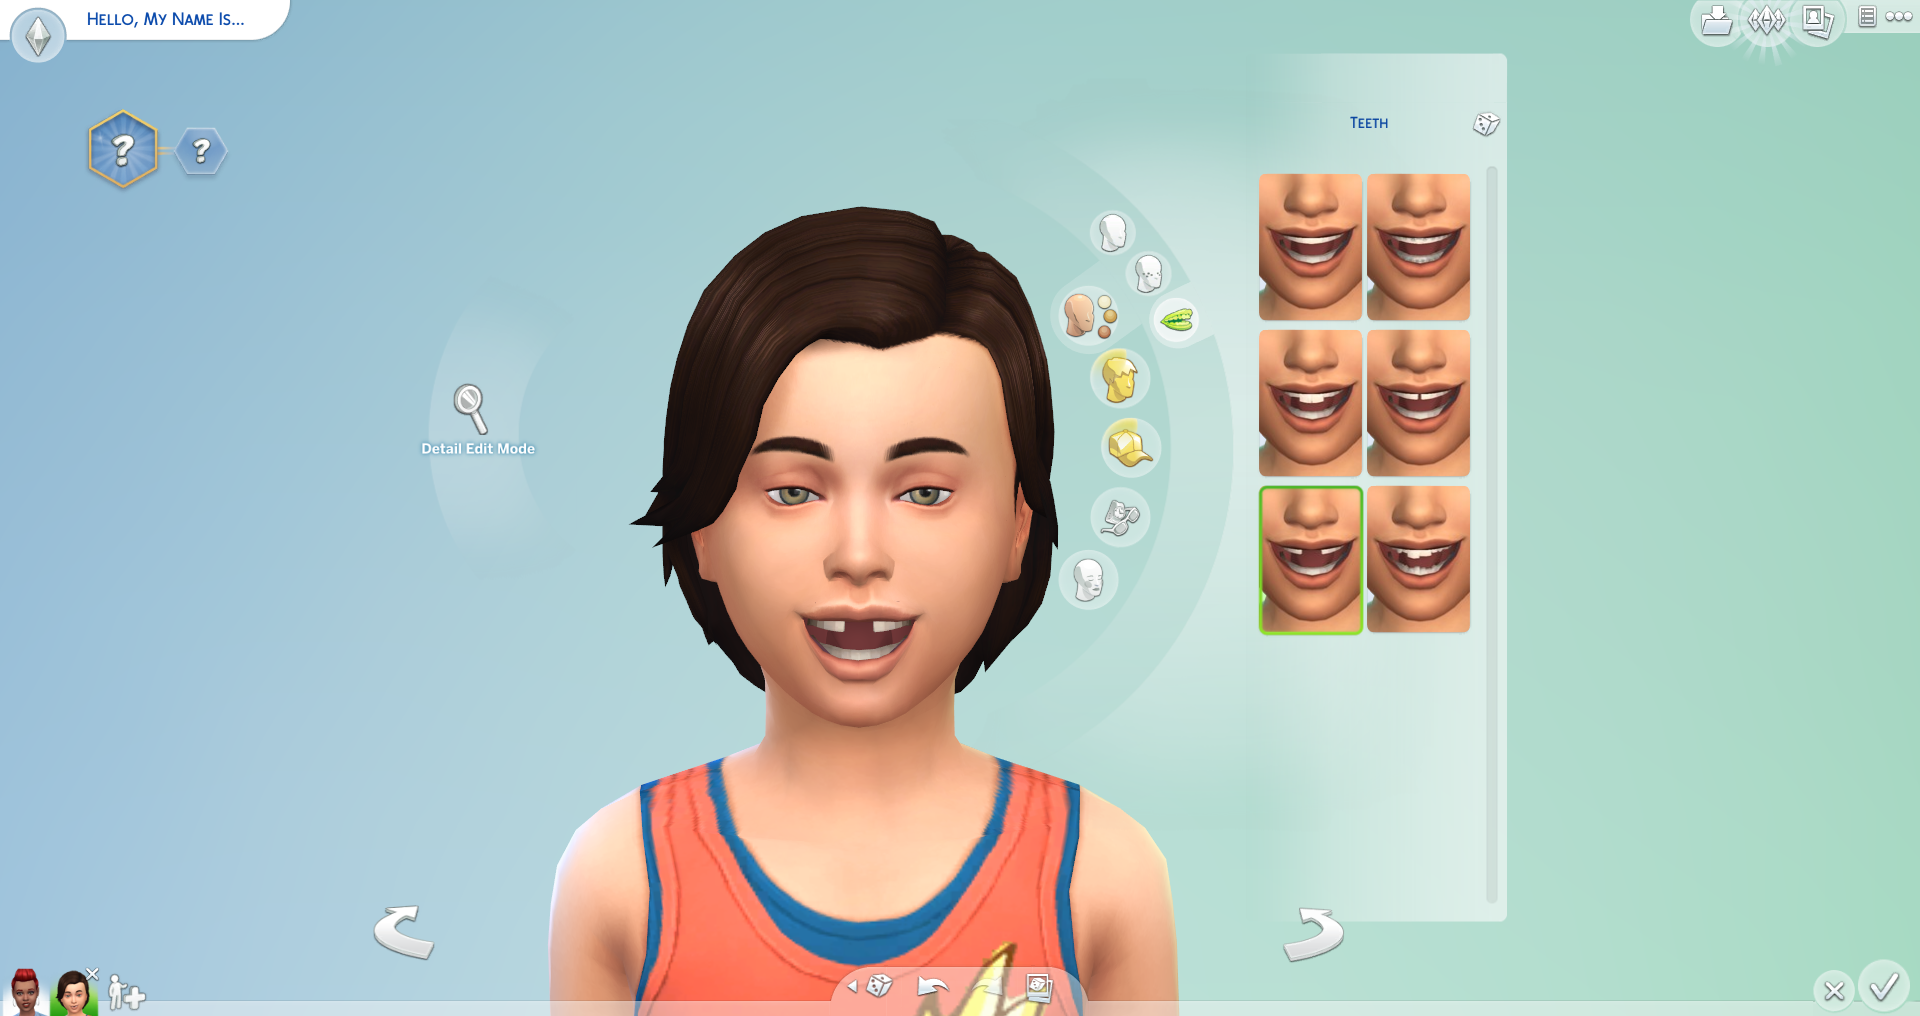 deadly toddlers mod sims 4